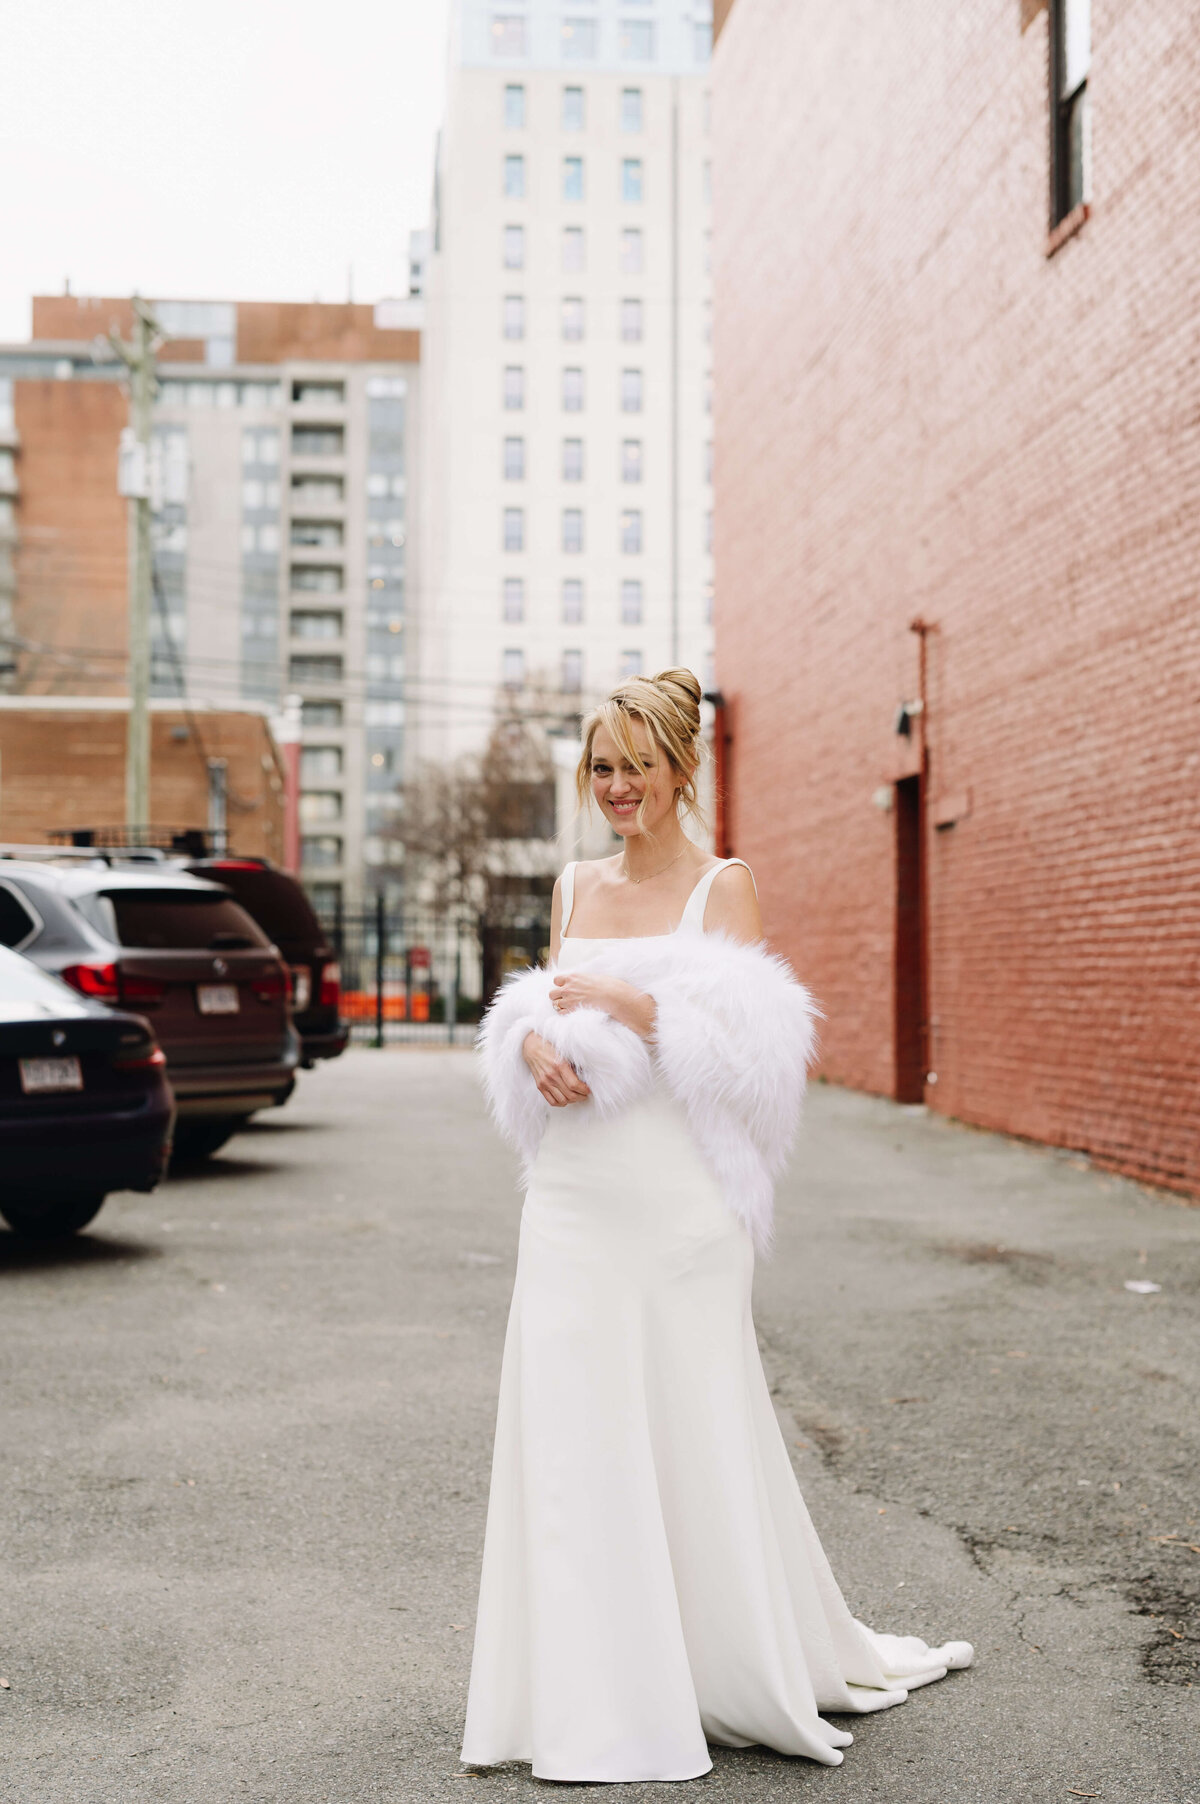 outdoor wedding photo of bride in an alley way in downtown Richmond while she wears a white fur coat over we wedding dress outside the common house richmond wedding venue